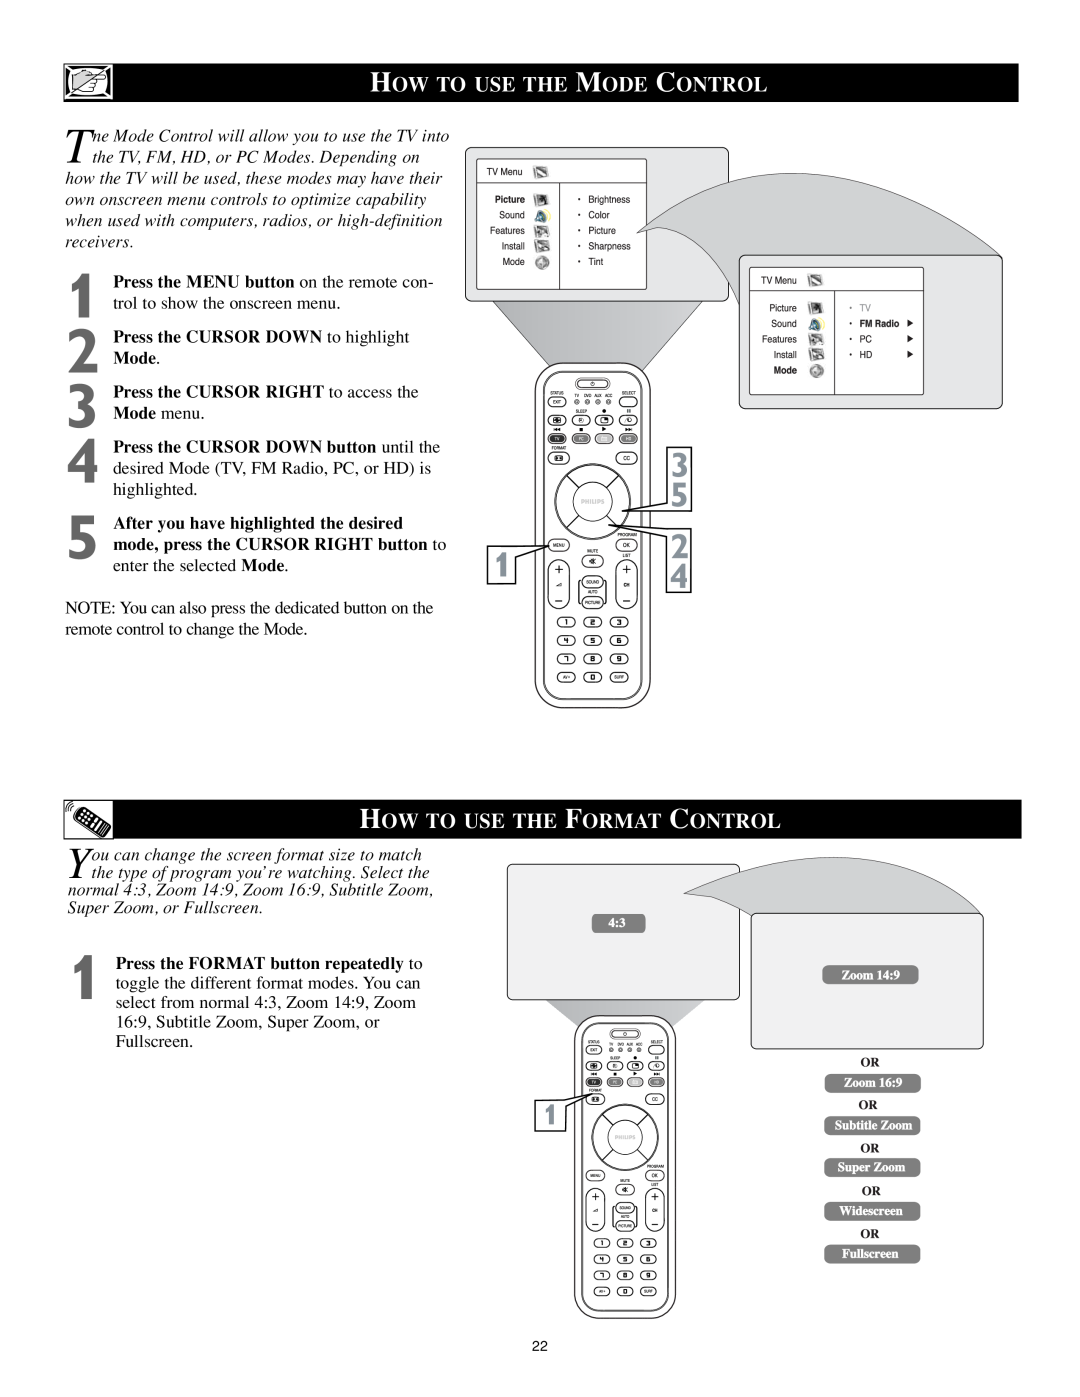 Philips 17PF9946/37 user manual How To Use The Mode Control, How To Use The Format Control 